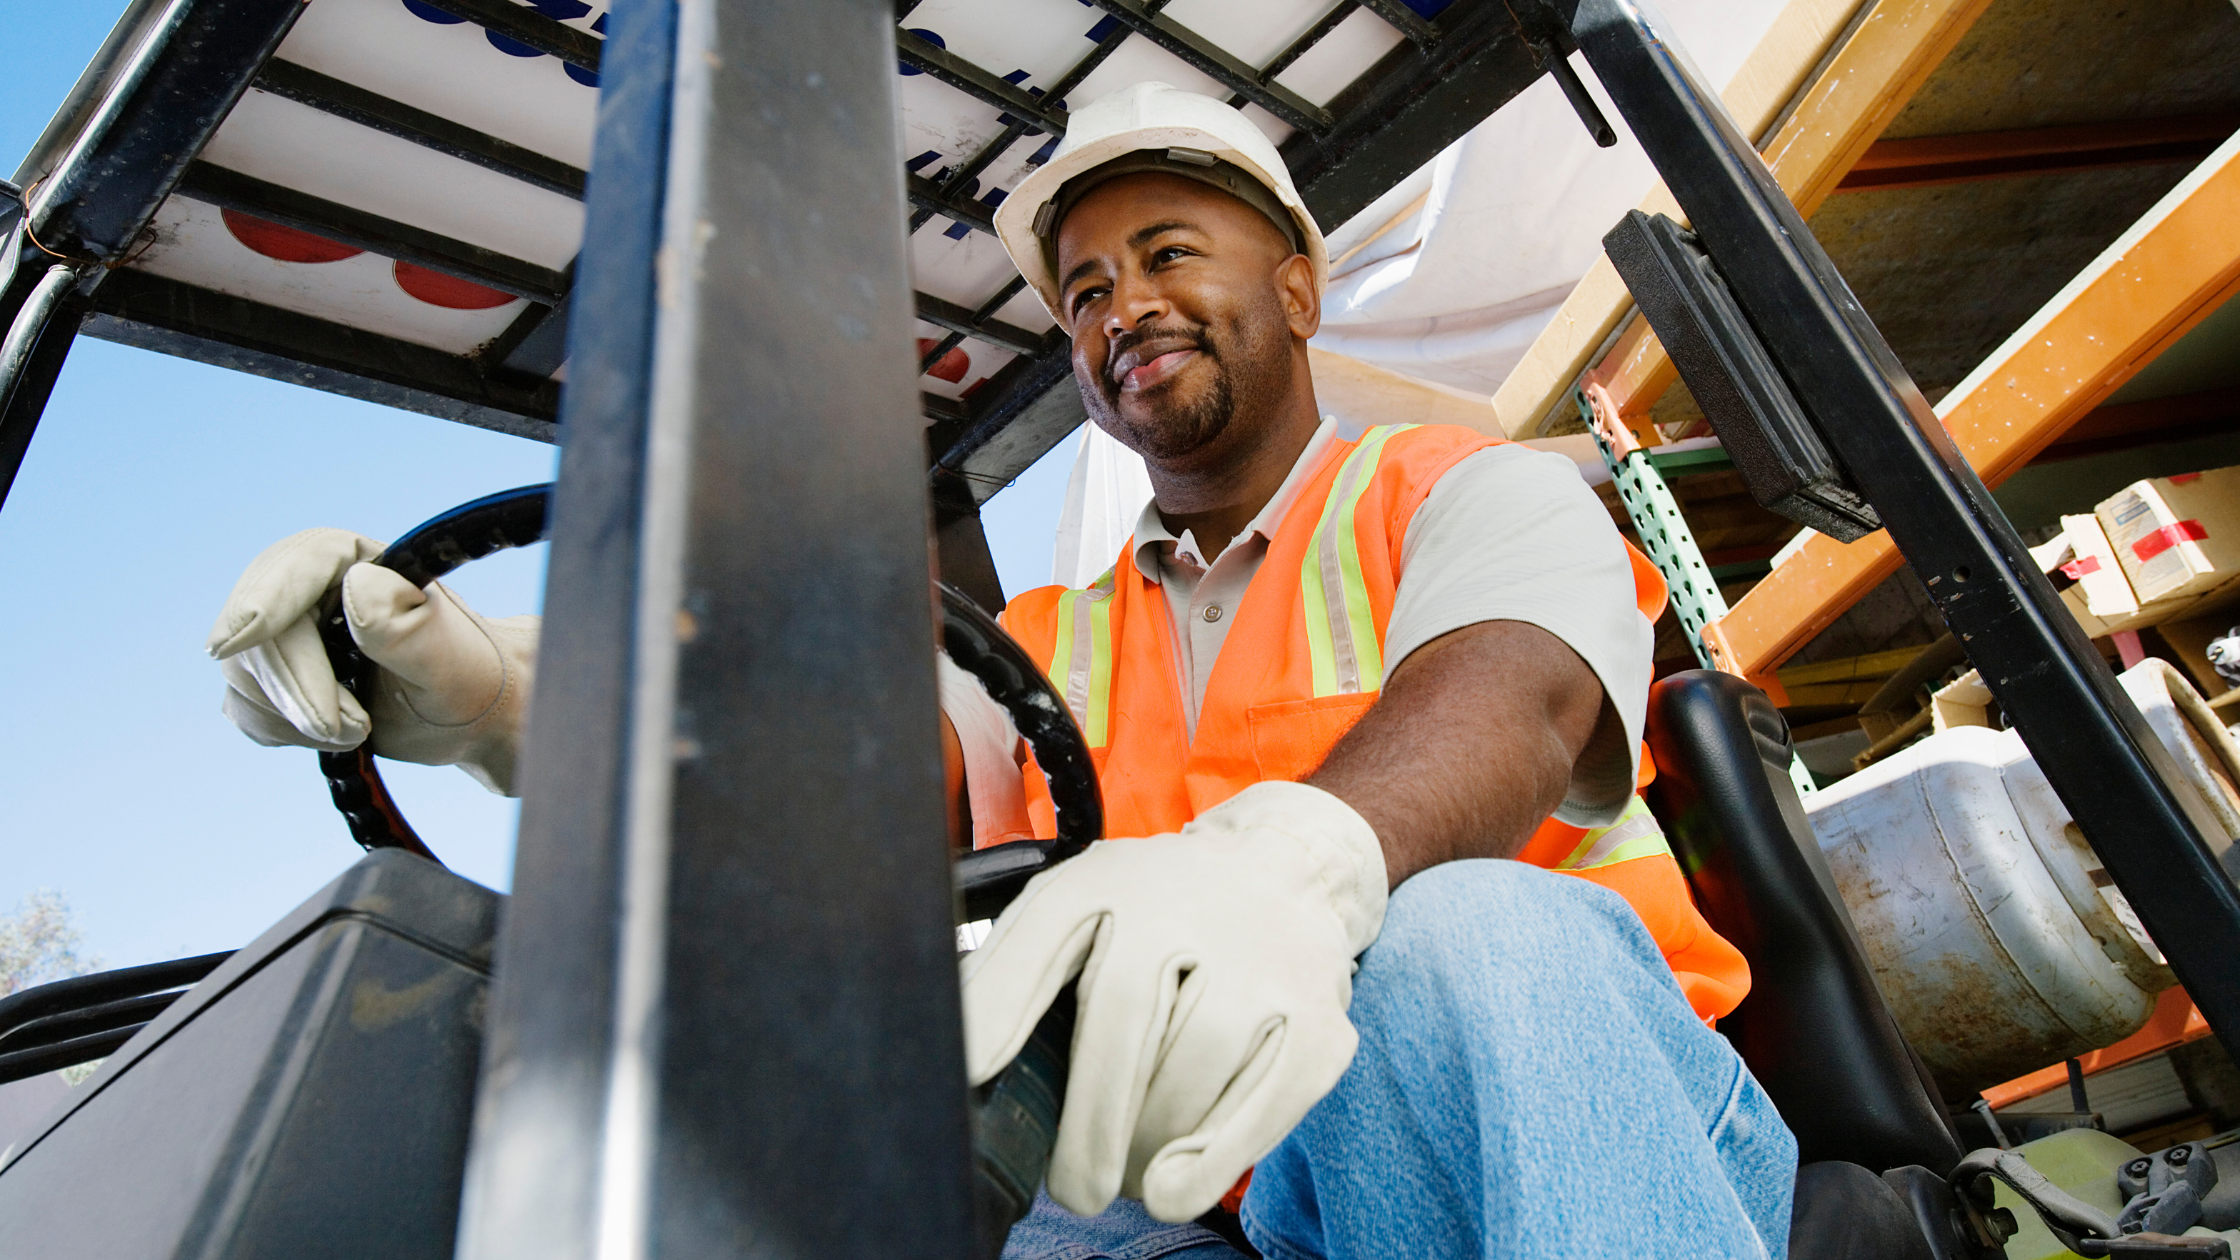 Man outdoors operating a fork lift.